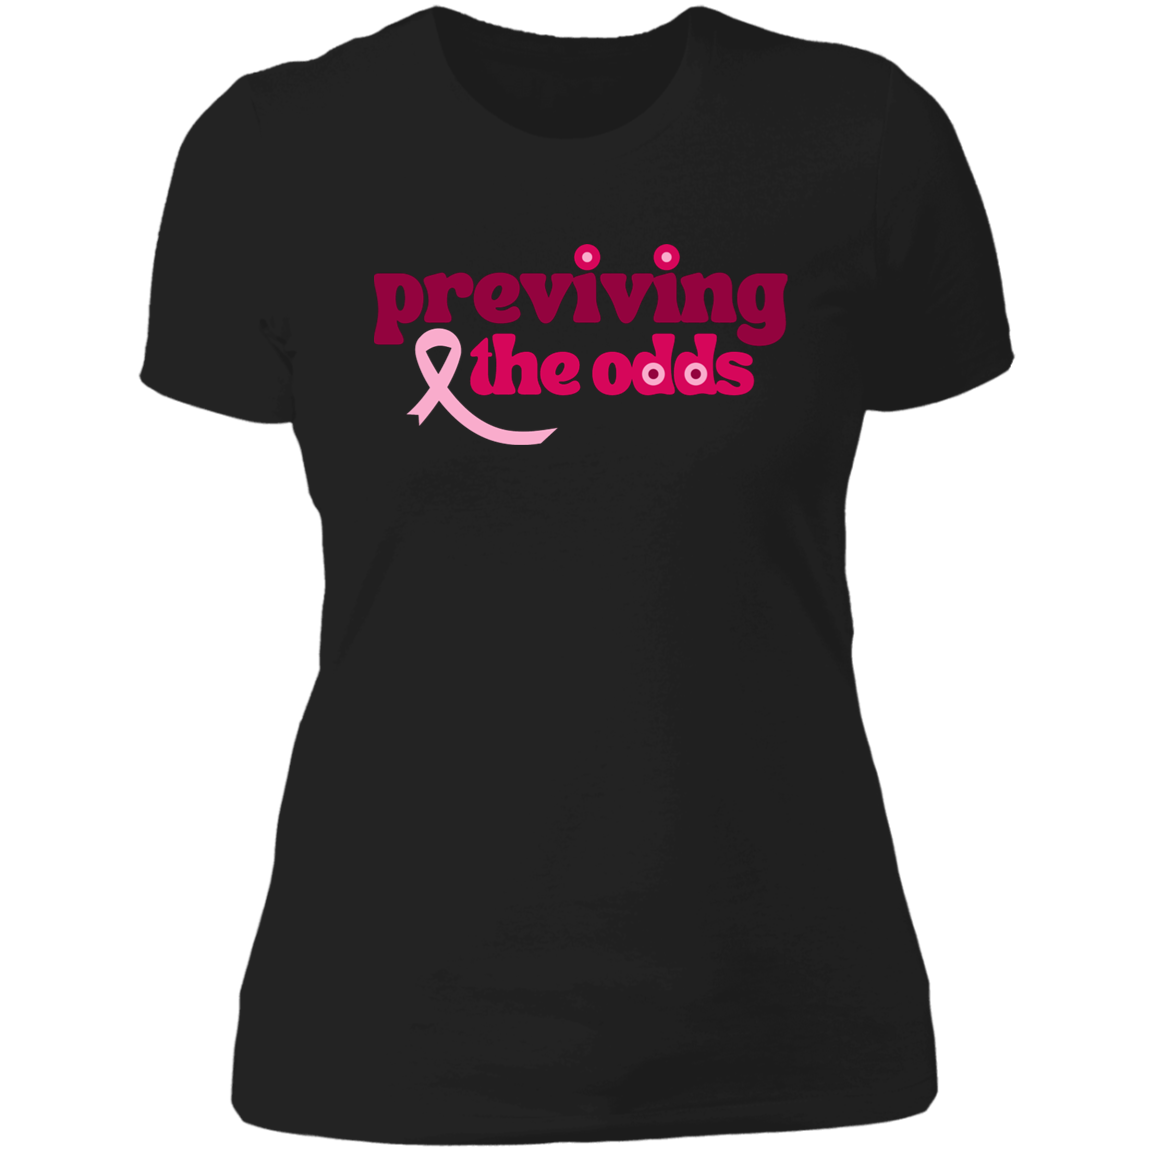 Previving the Odds T-Shirt